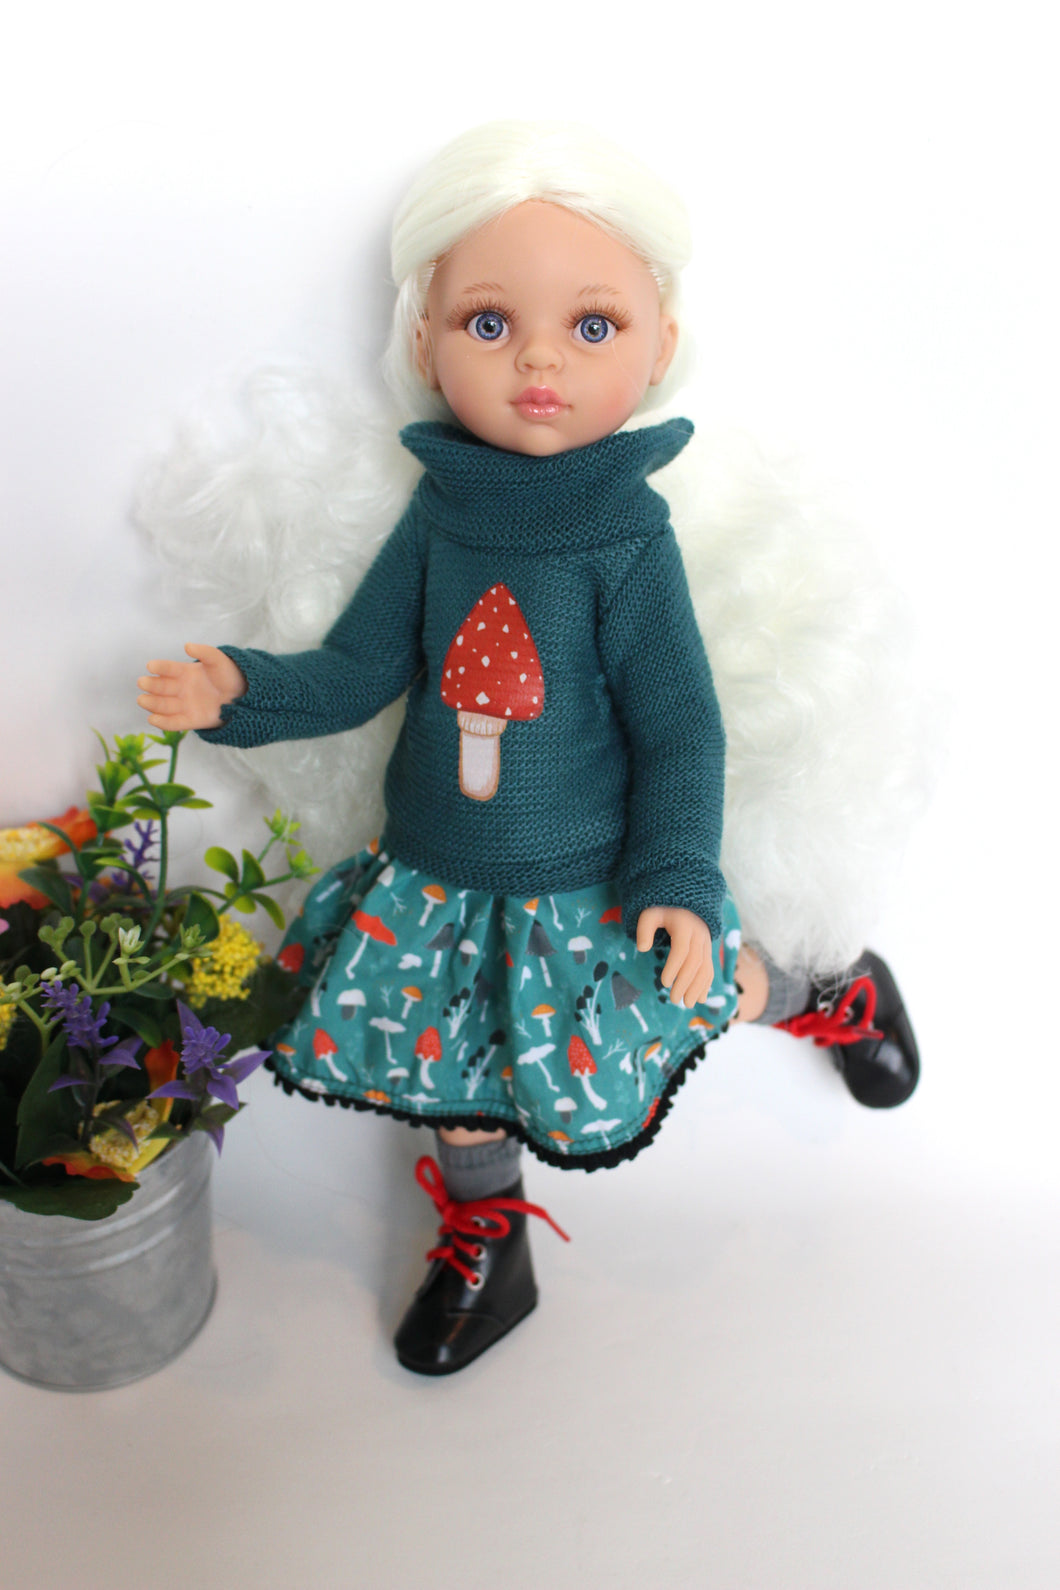 Articulated Cecile in Winter Outfit (Las Amigas Paola Reina)